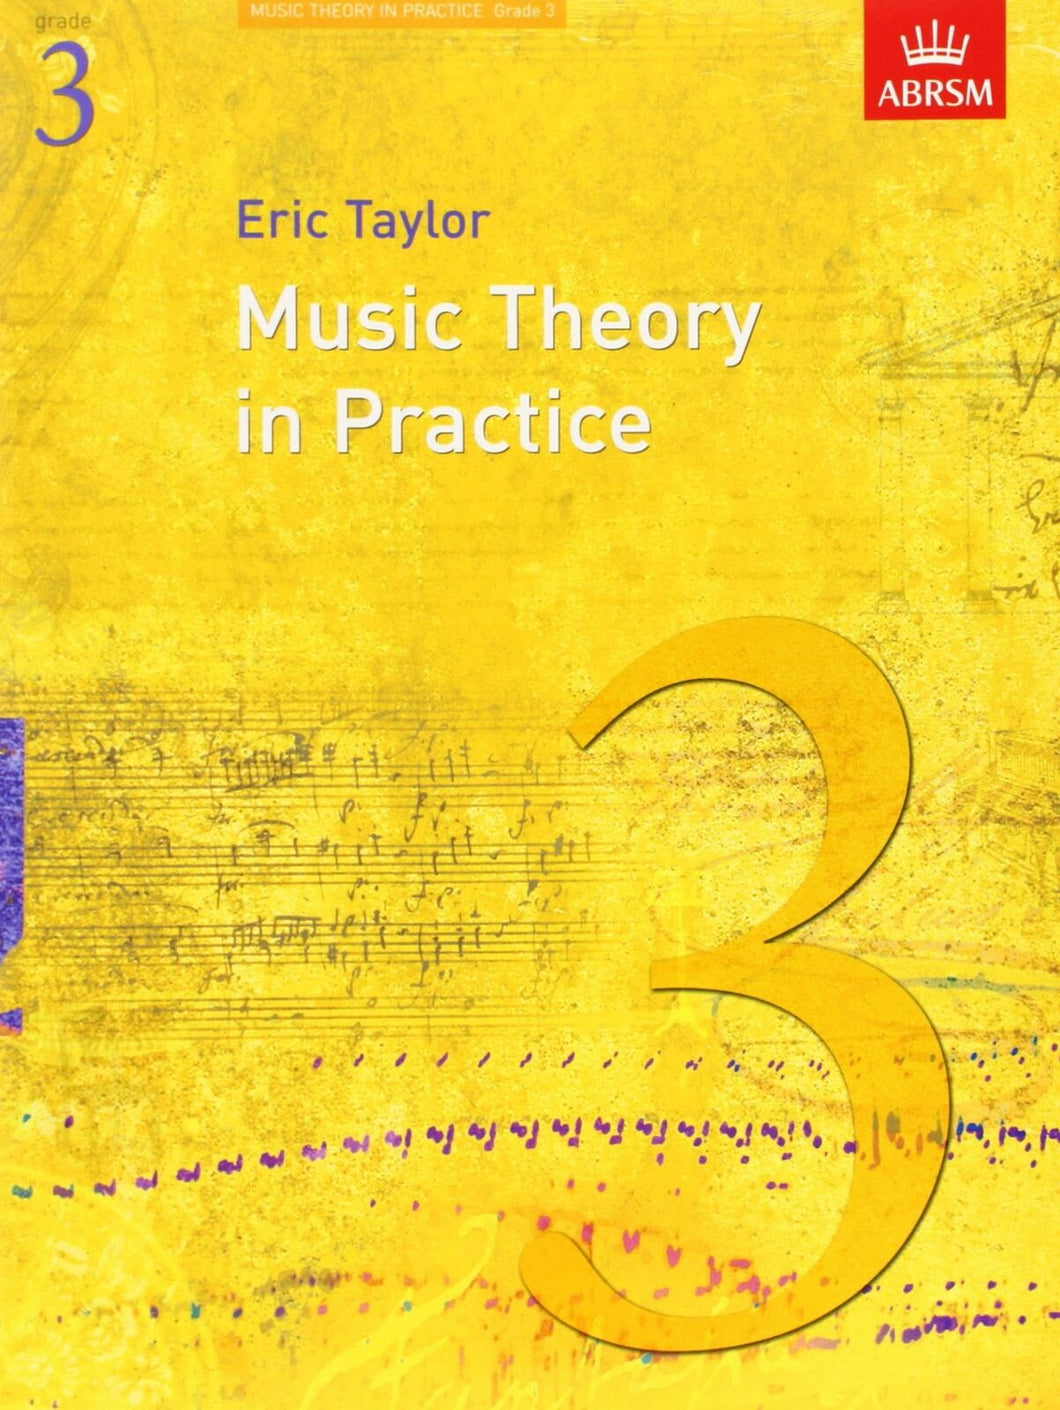 Music Theory In Practice by Eric Taylor Grade 3